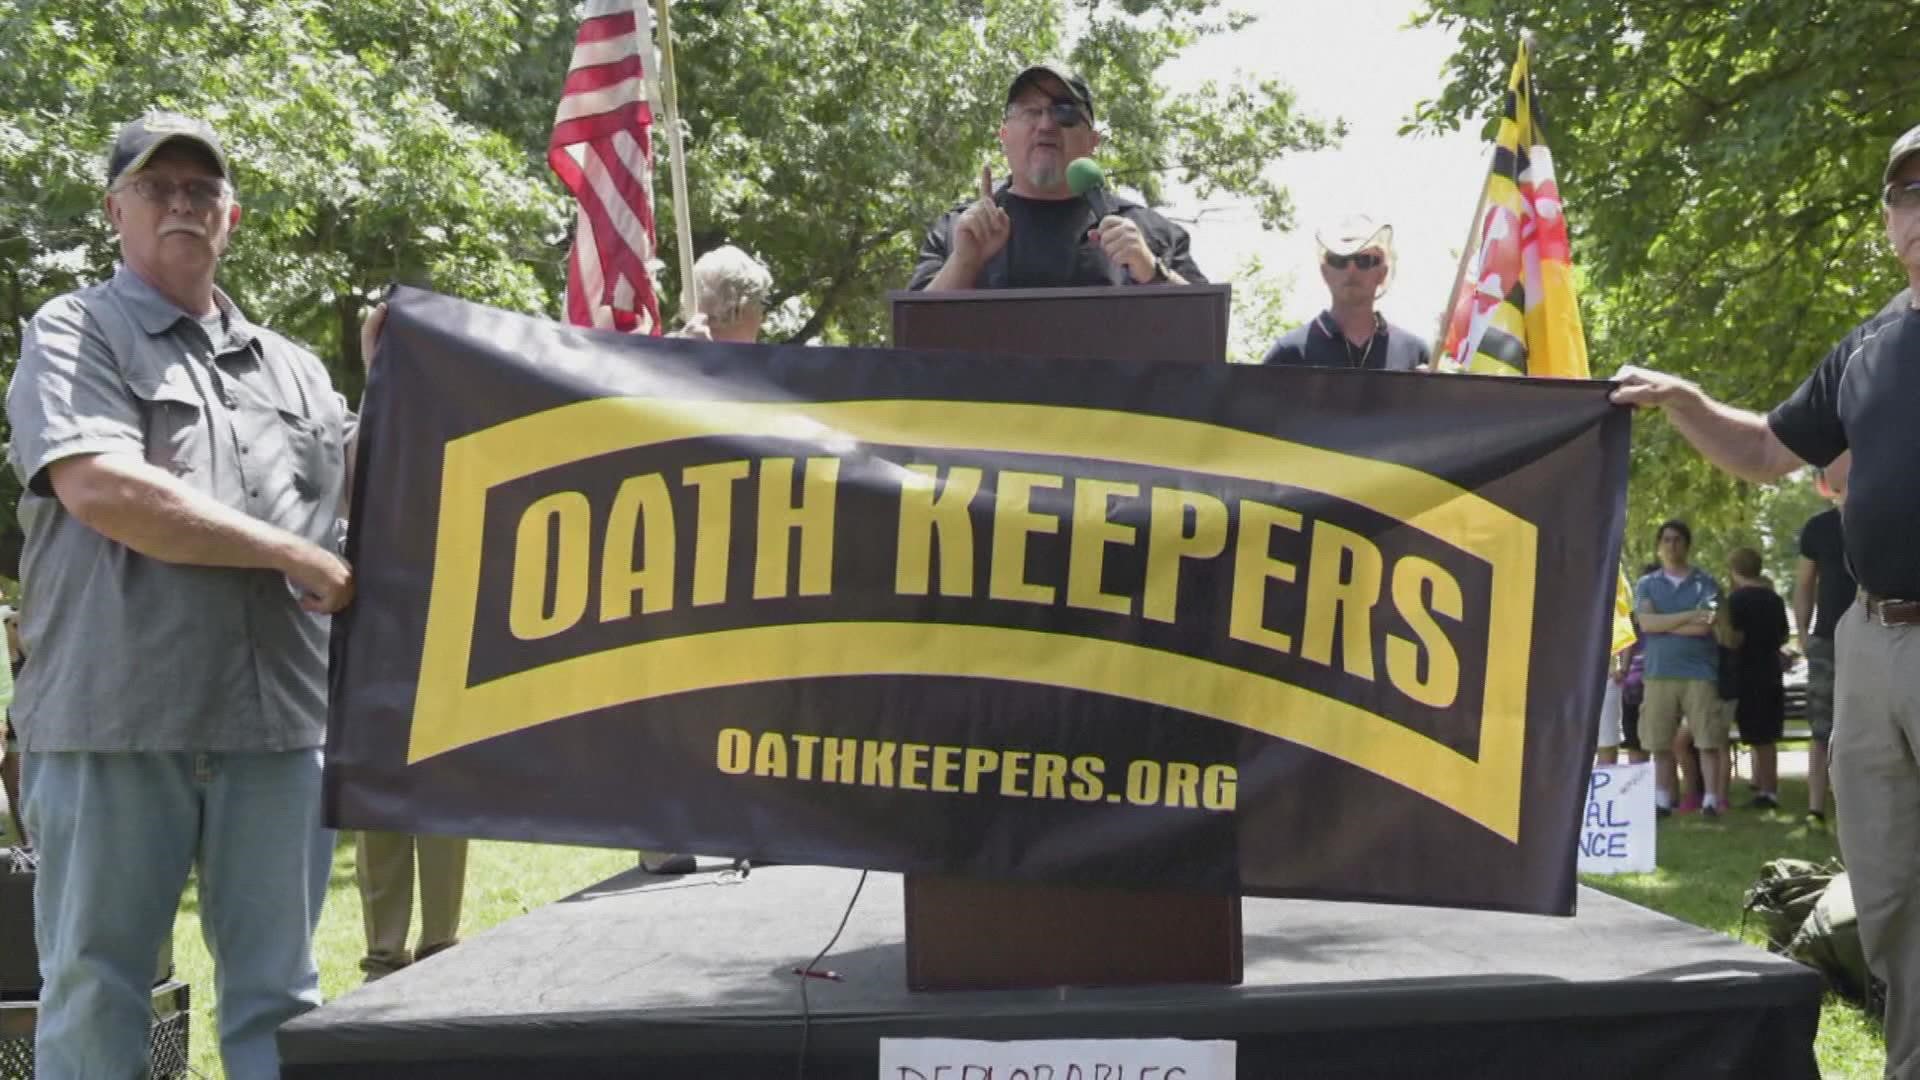 The founder of the Oath Keepers & the leader of its Florida chapter were recently found guilty of seditious conspiracy in connection to Jan. 6th.